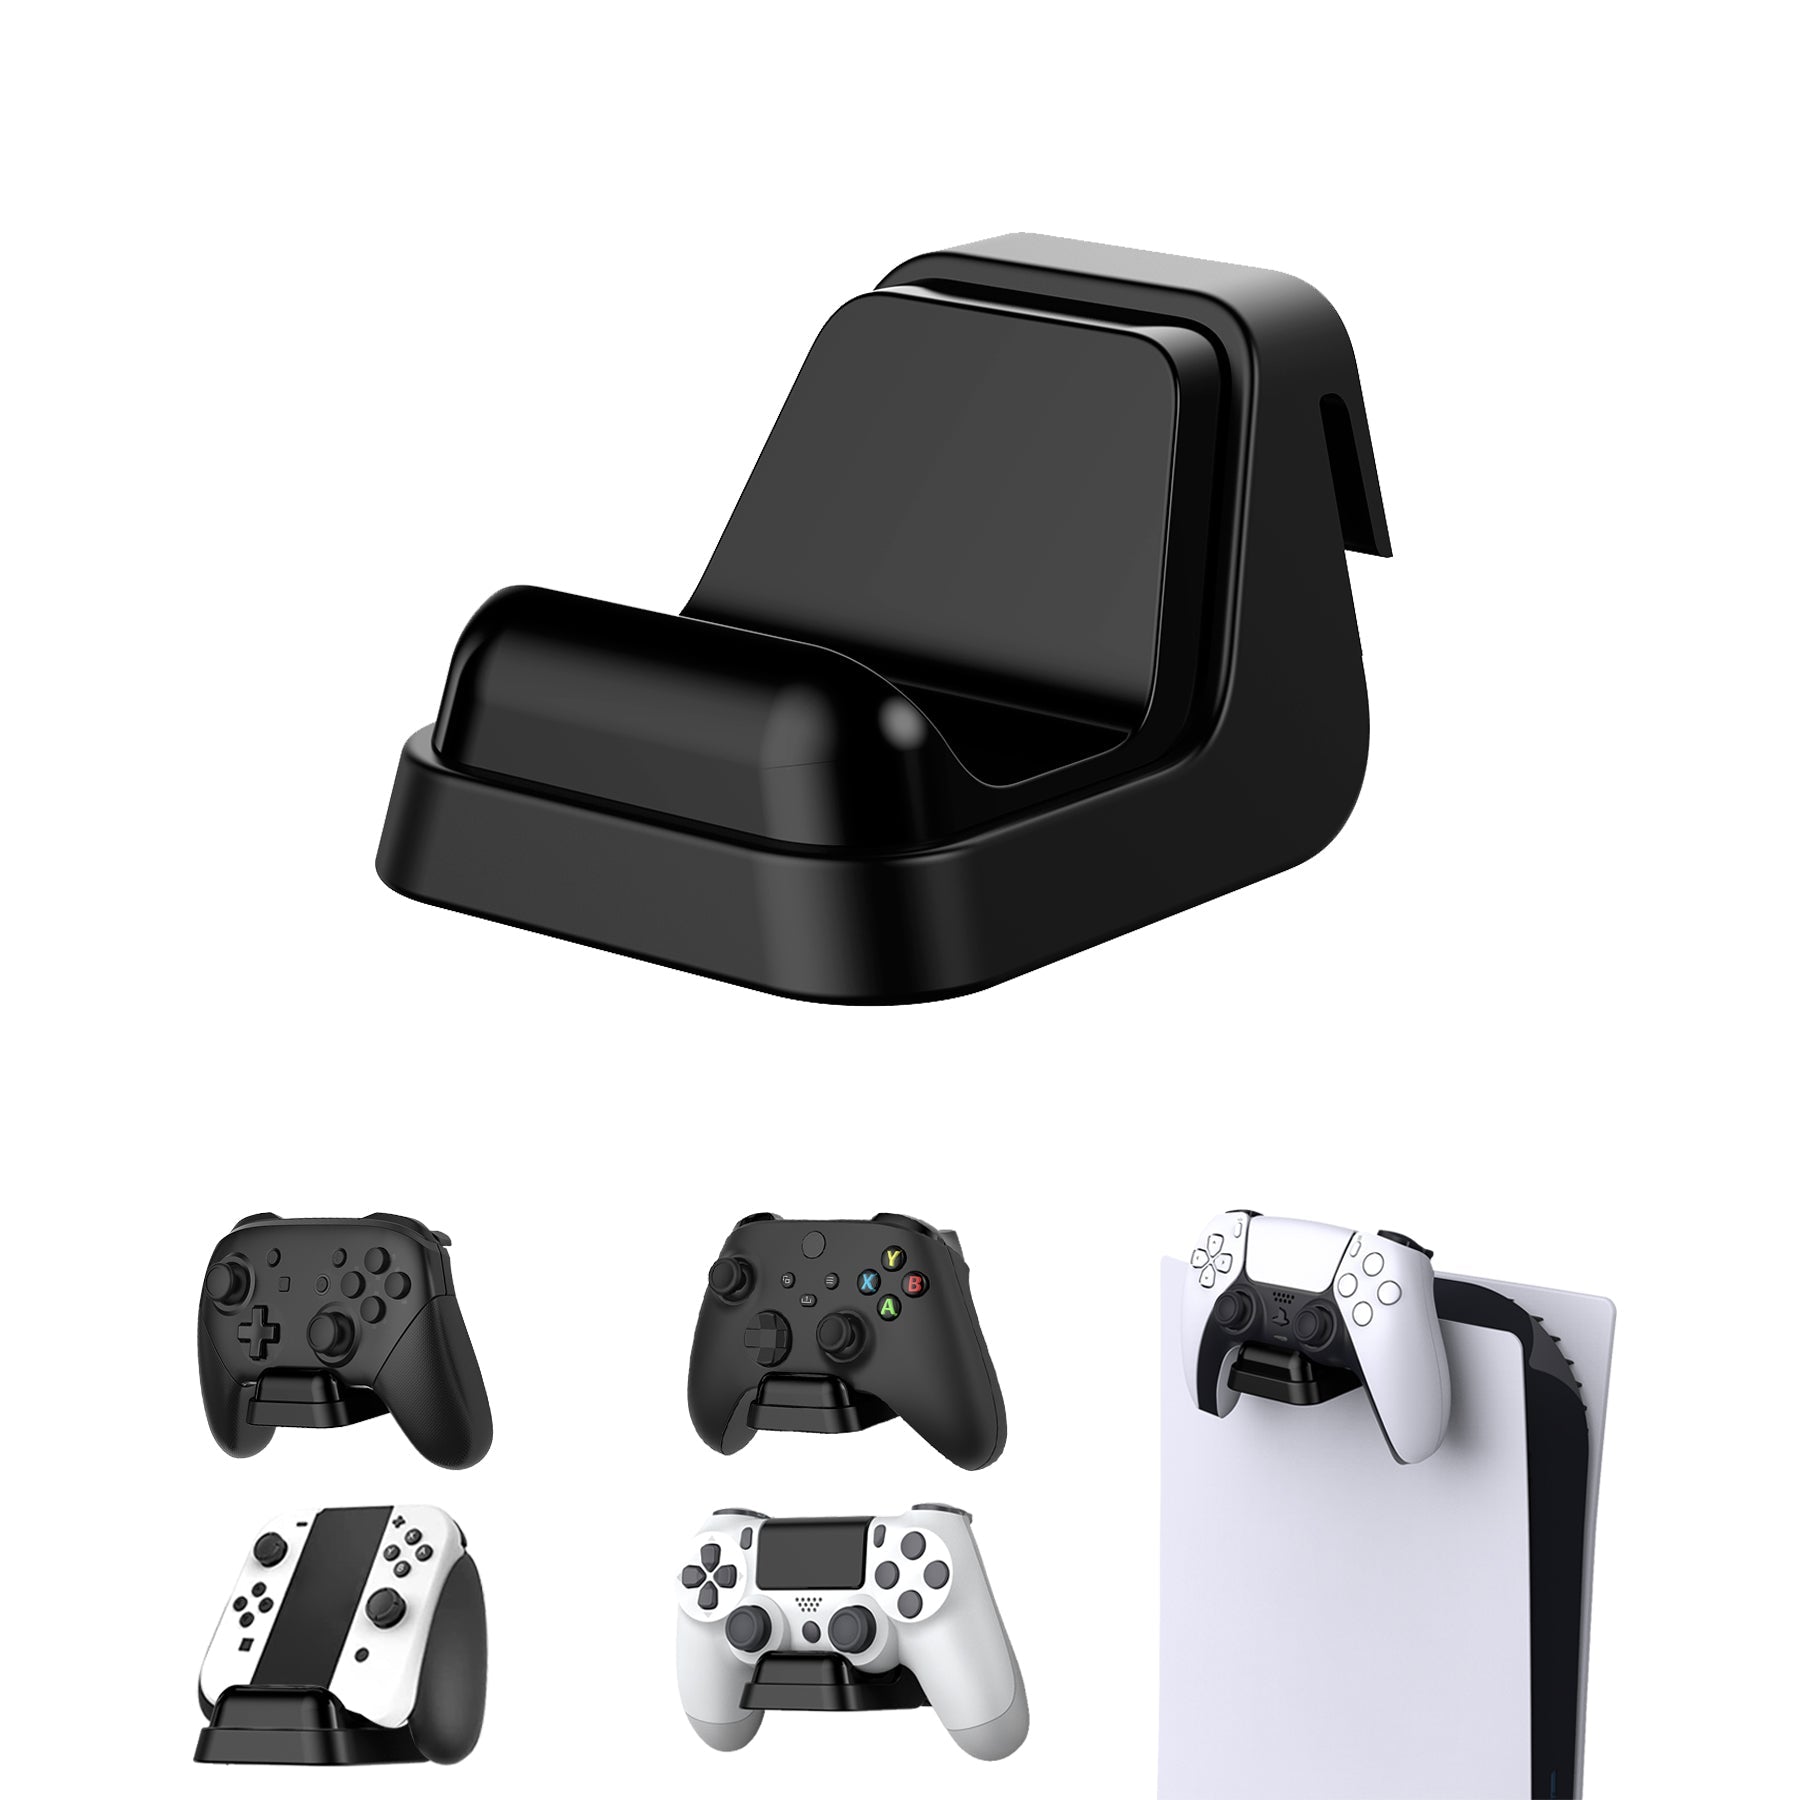 PlayVital Universal Game Controller Wall Mount for ps5 & Headset, Wall Stand for Xbox Series Controller, Wall Holder for Nintendo Switch Pro Controller, Dedicated Console Hanger Mode for ps5 - Black - PFPJ068 PlayVital